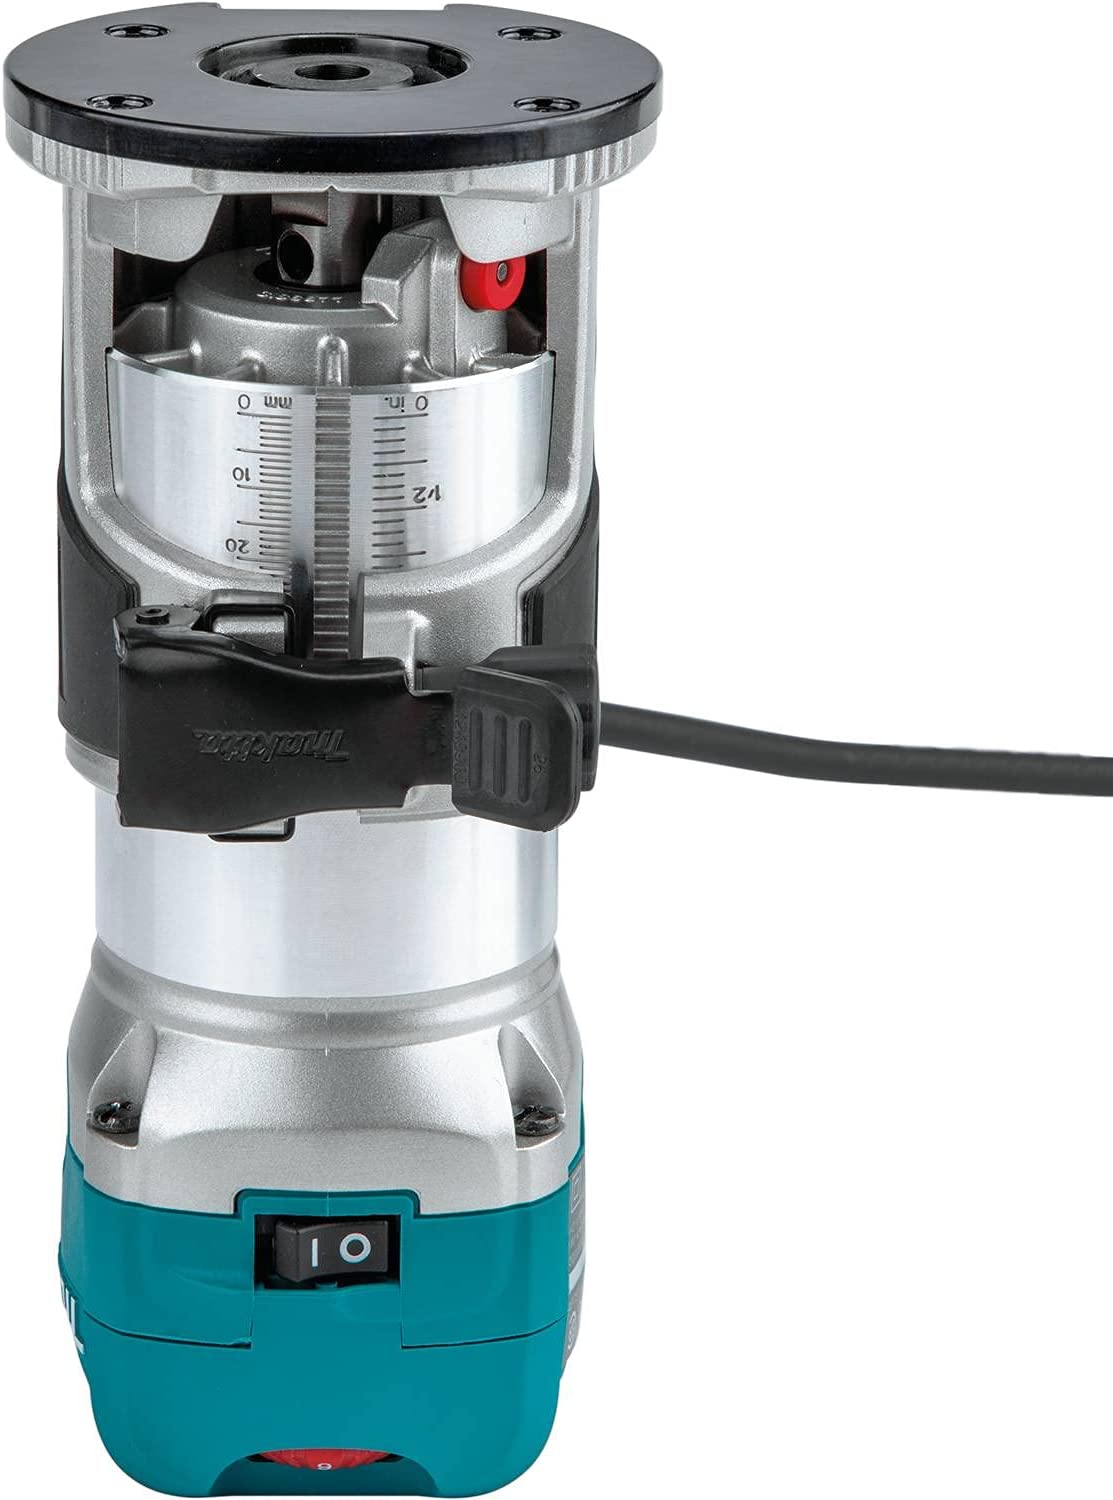 Makita  6.5 Amp 1-1/4 HP Corded Fixed Base Variable Speed Compact Router with Quick-Release